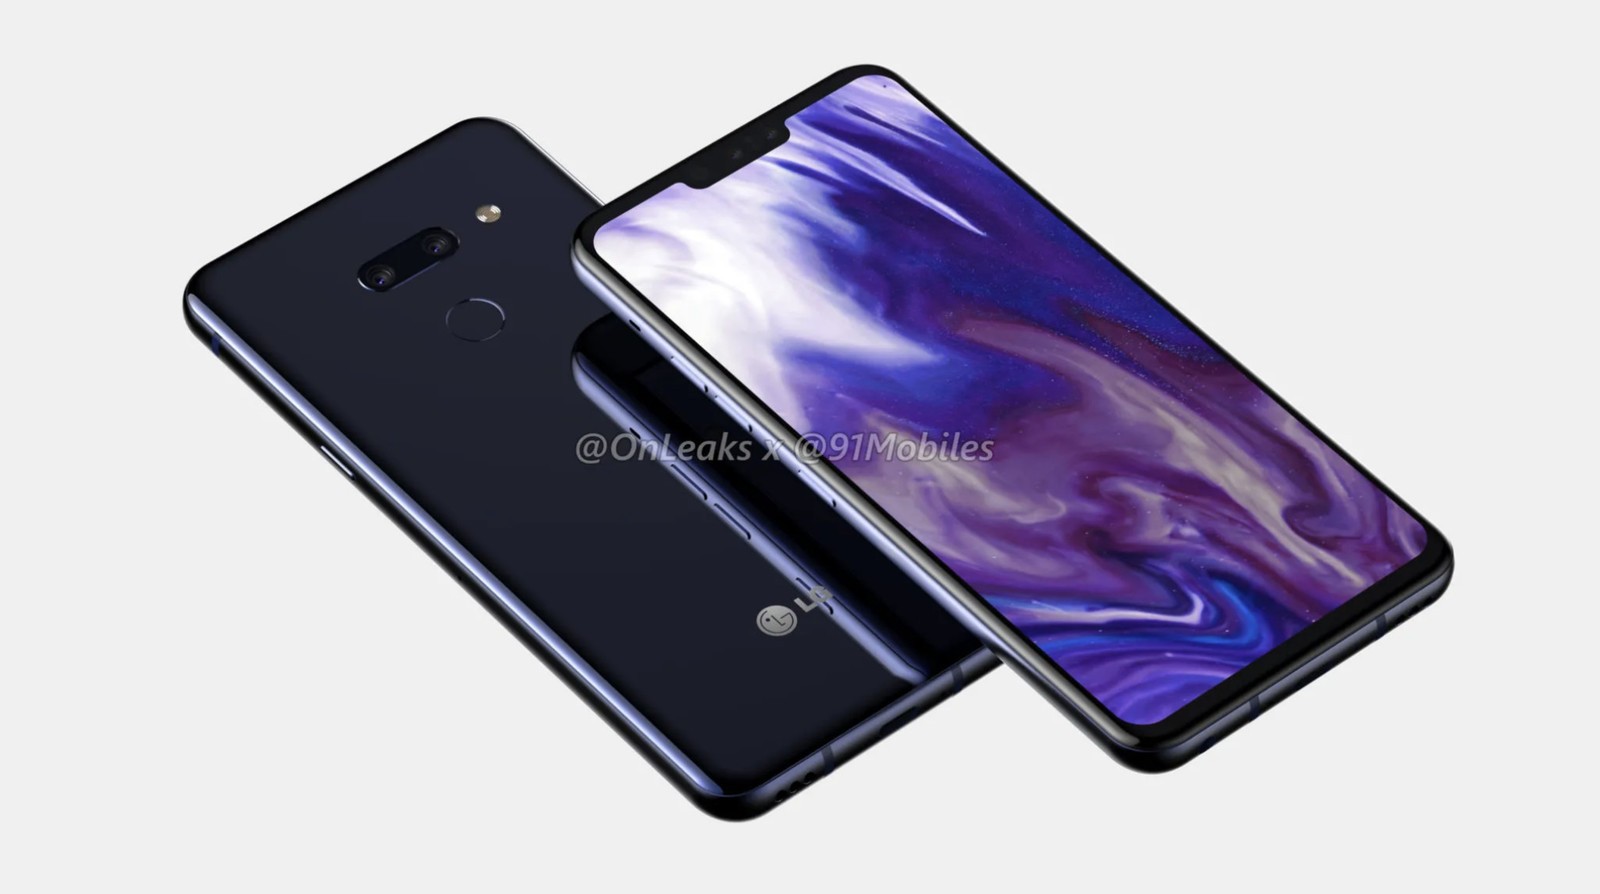 LG G8 is rumoured to have a sleek design.